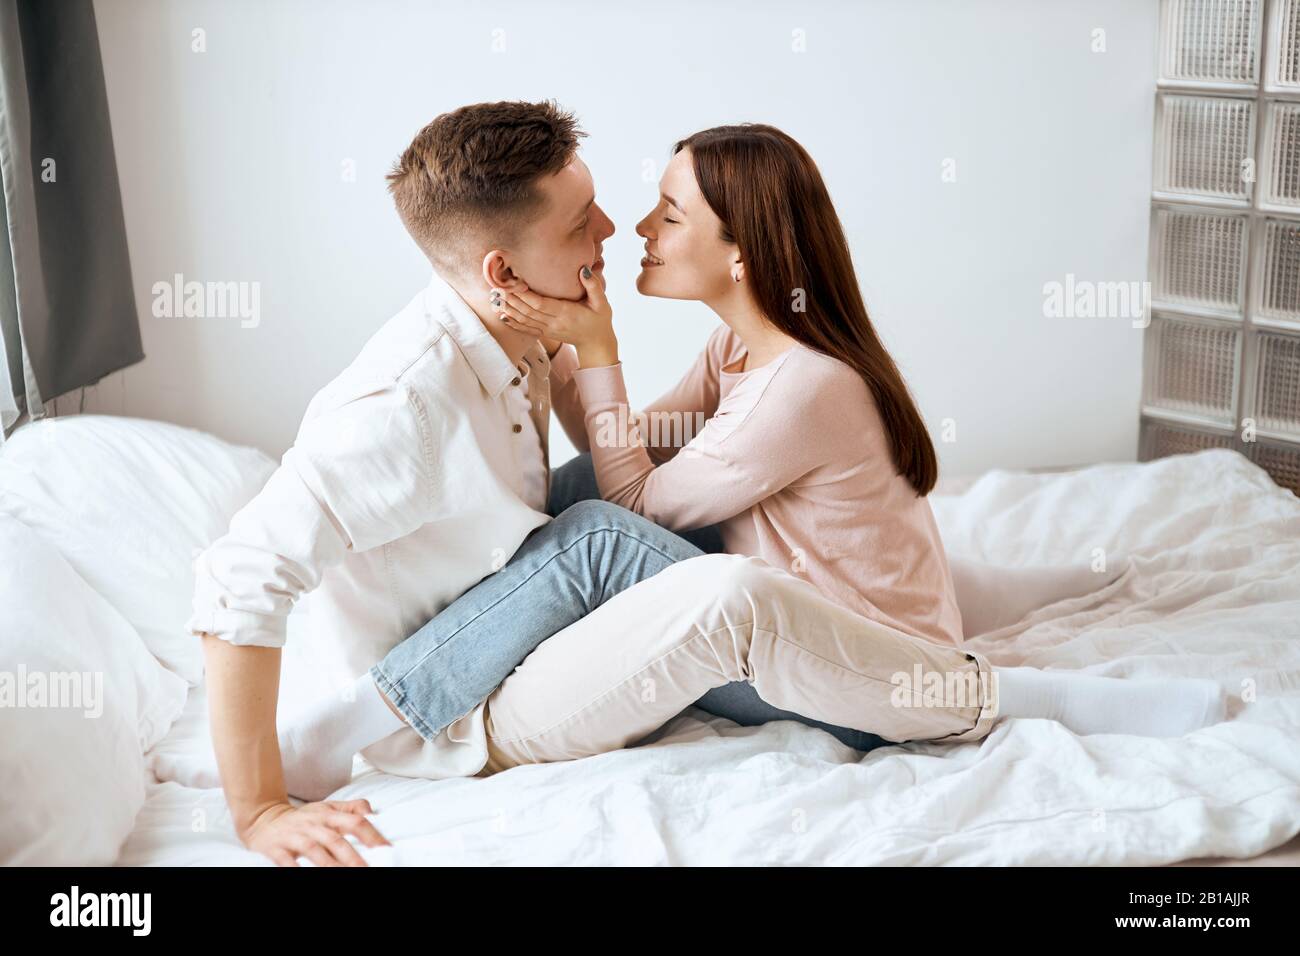 young lovely woman congratulating her husband with birthdaym girl touching her boyfriend's cheeks and going to kiss him Stock Photo